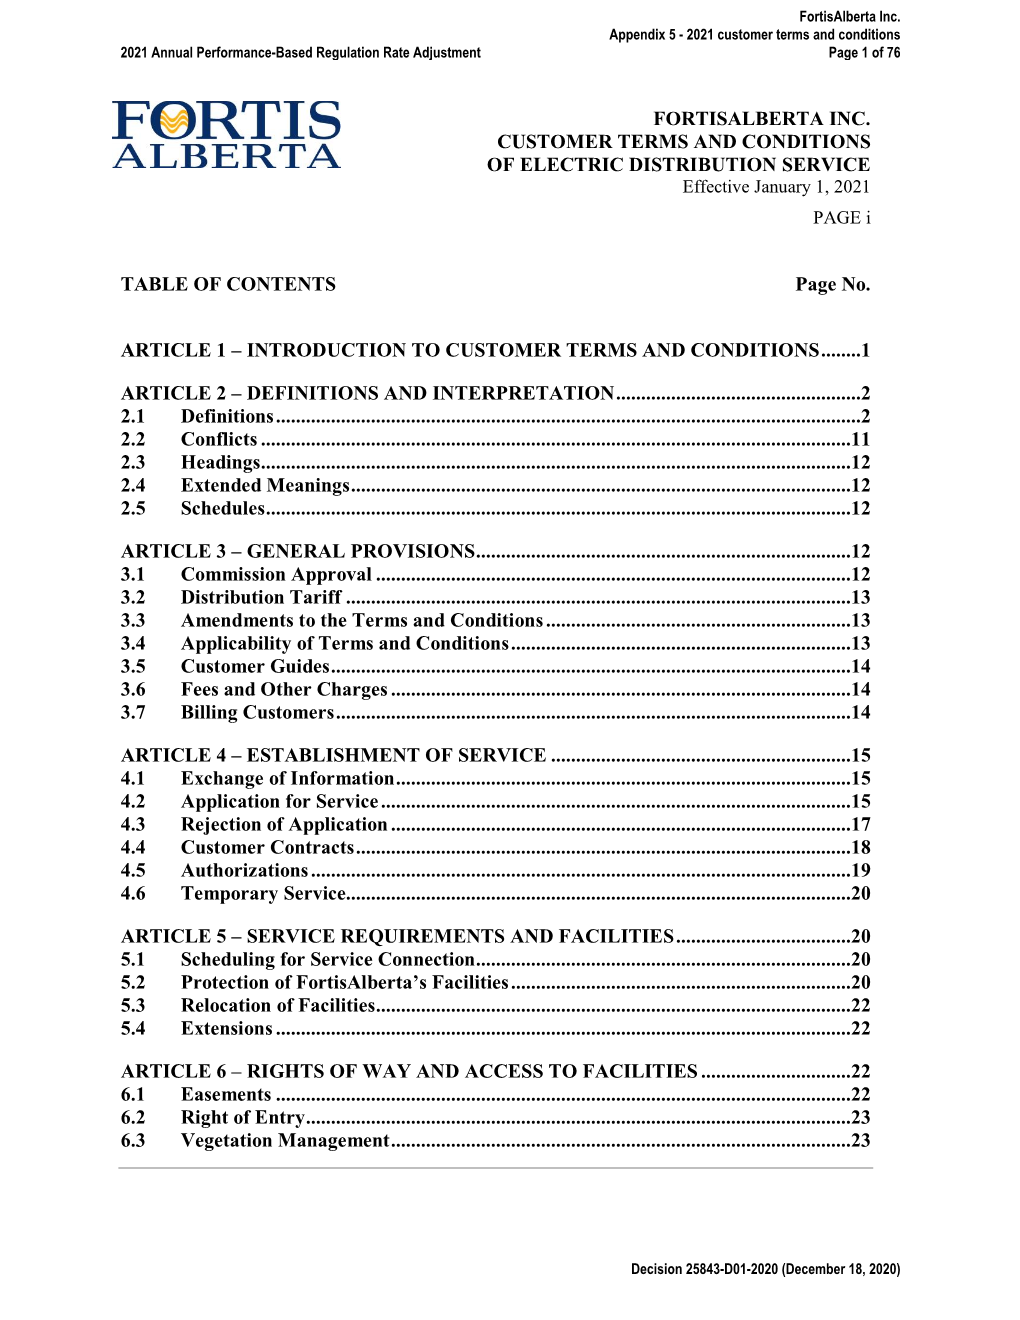 FORTISALBERTA INC. CUSTOMER TERMS and CONDITIONS of ELECTRIC DISTRIBUTION SERVICE Effective January 1, 2021 PAGE I